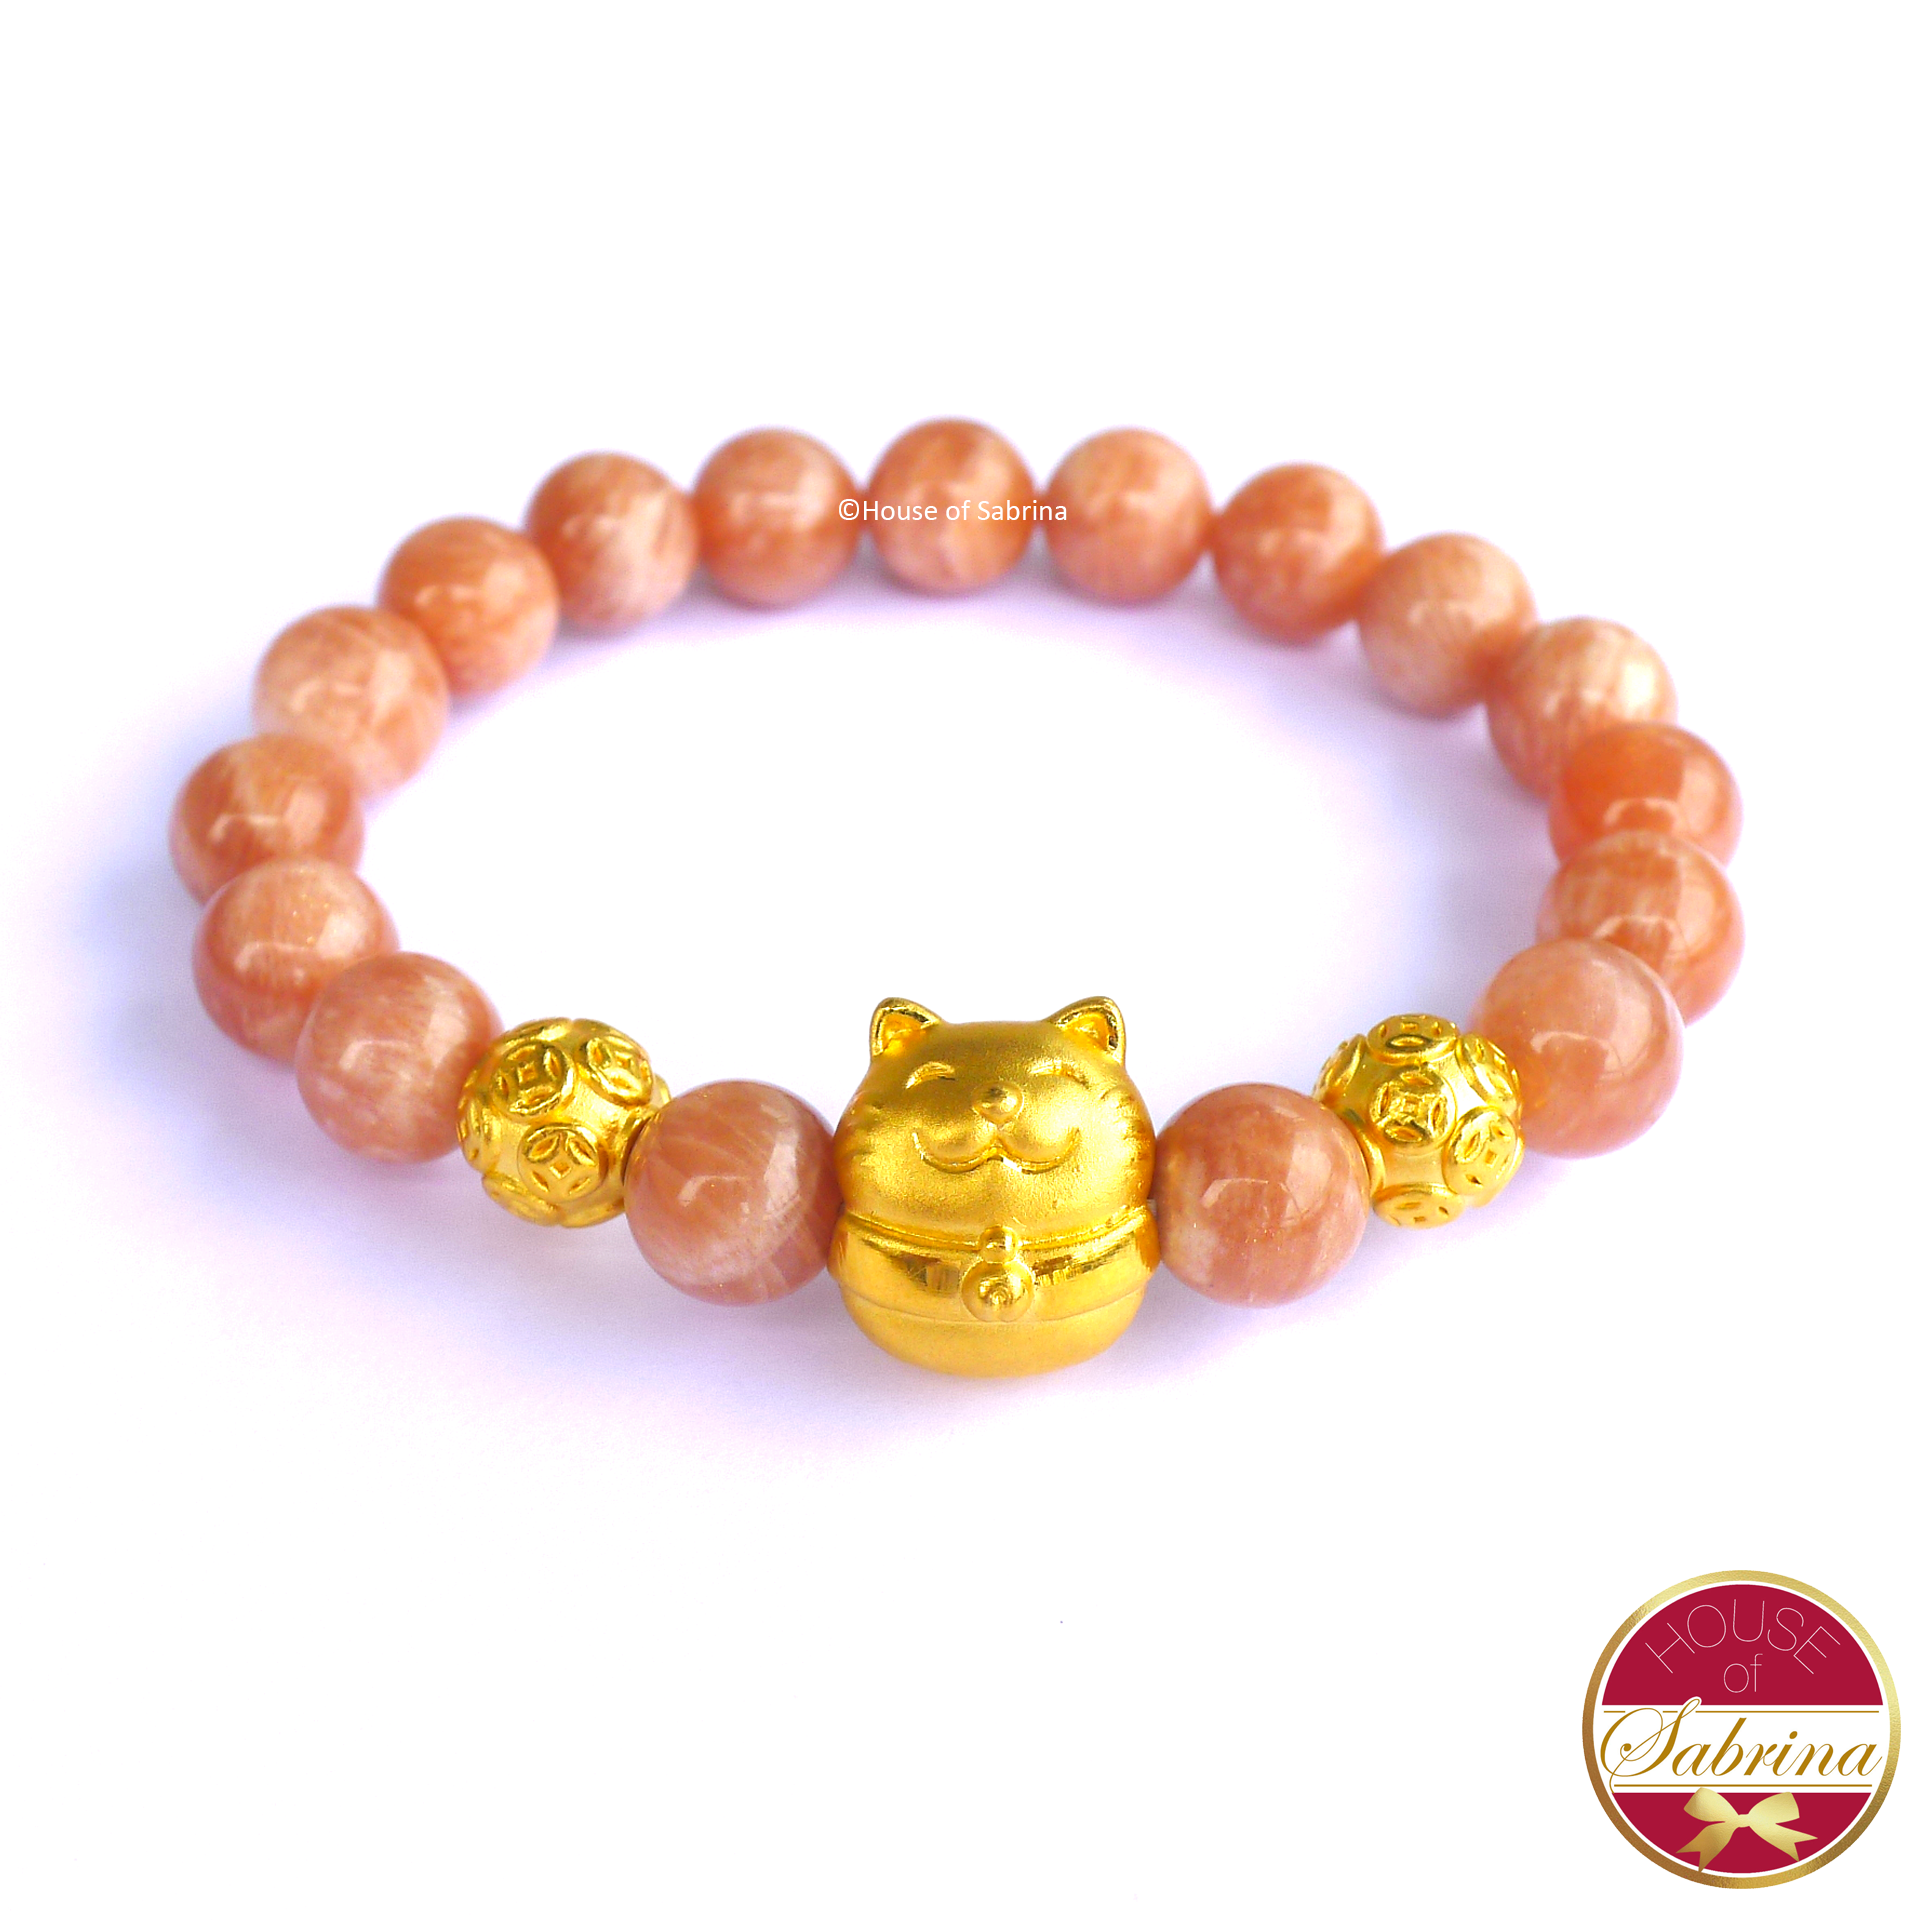 24K Gold Fortune Cat with Chinese Coins in Sunstone Gemstone Bracelet